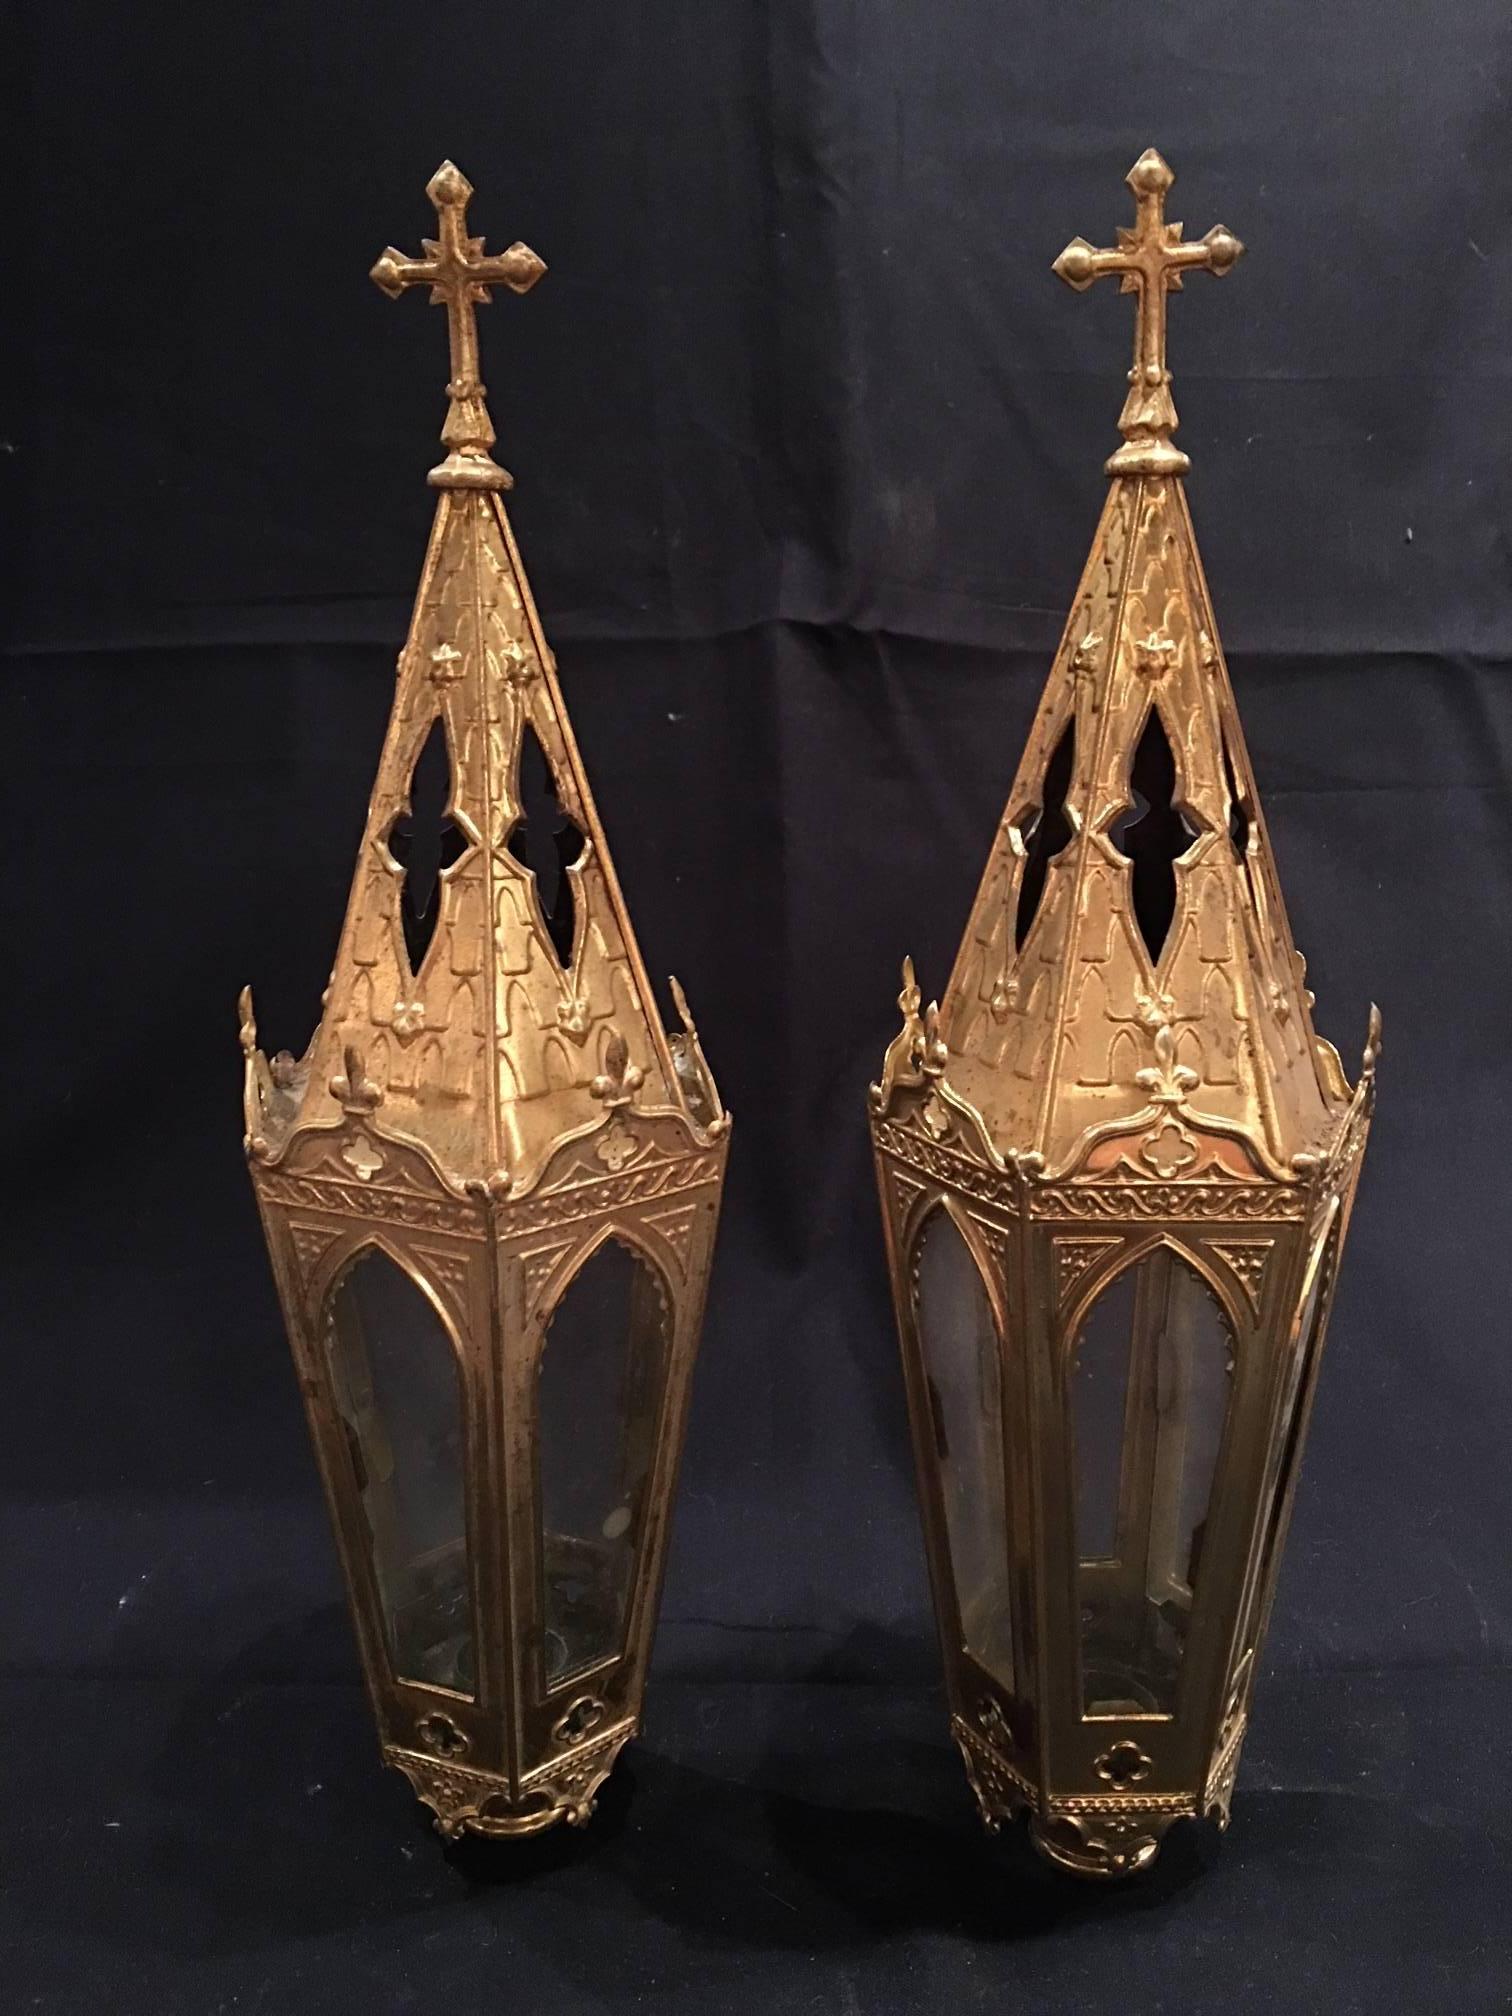 French set of four polished brass pole lanterns or candlesticks, 19th century.